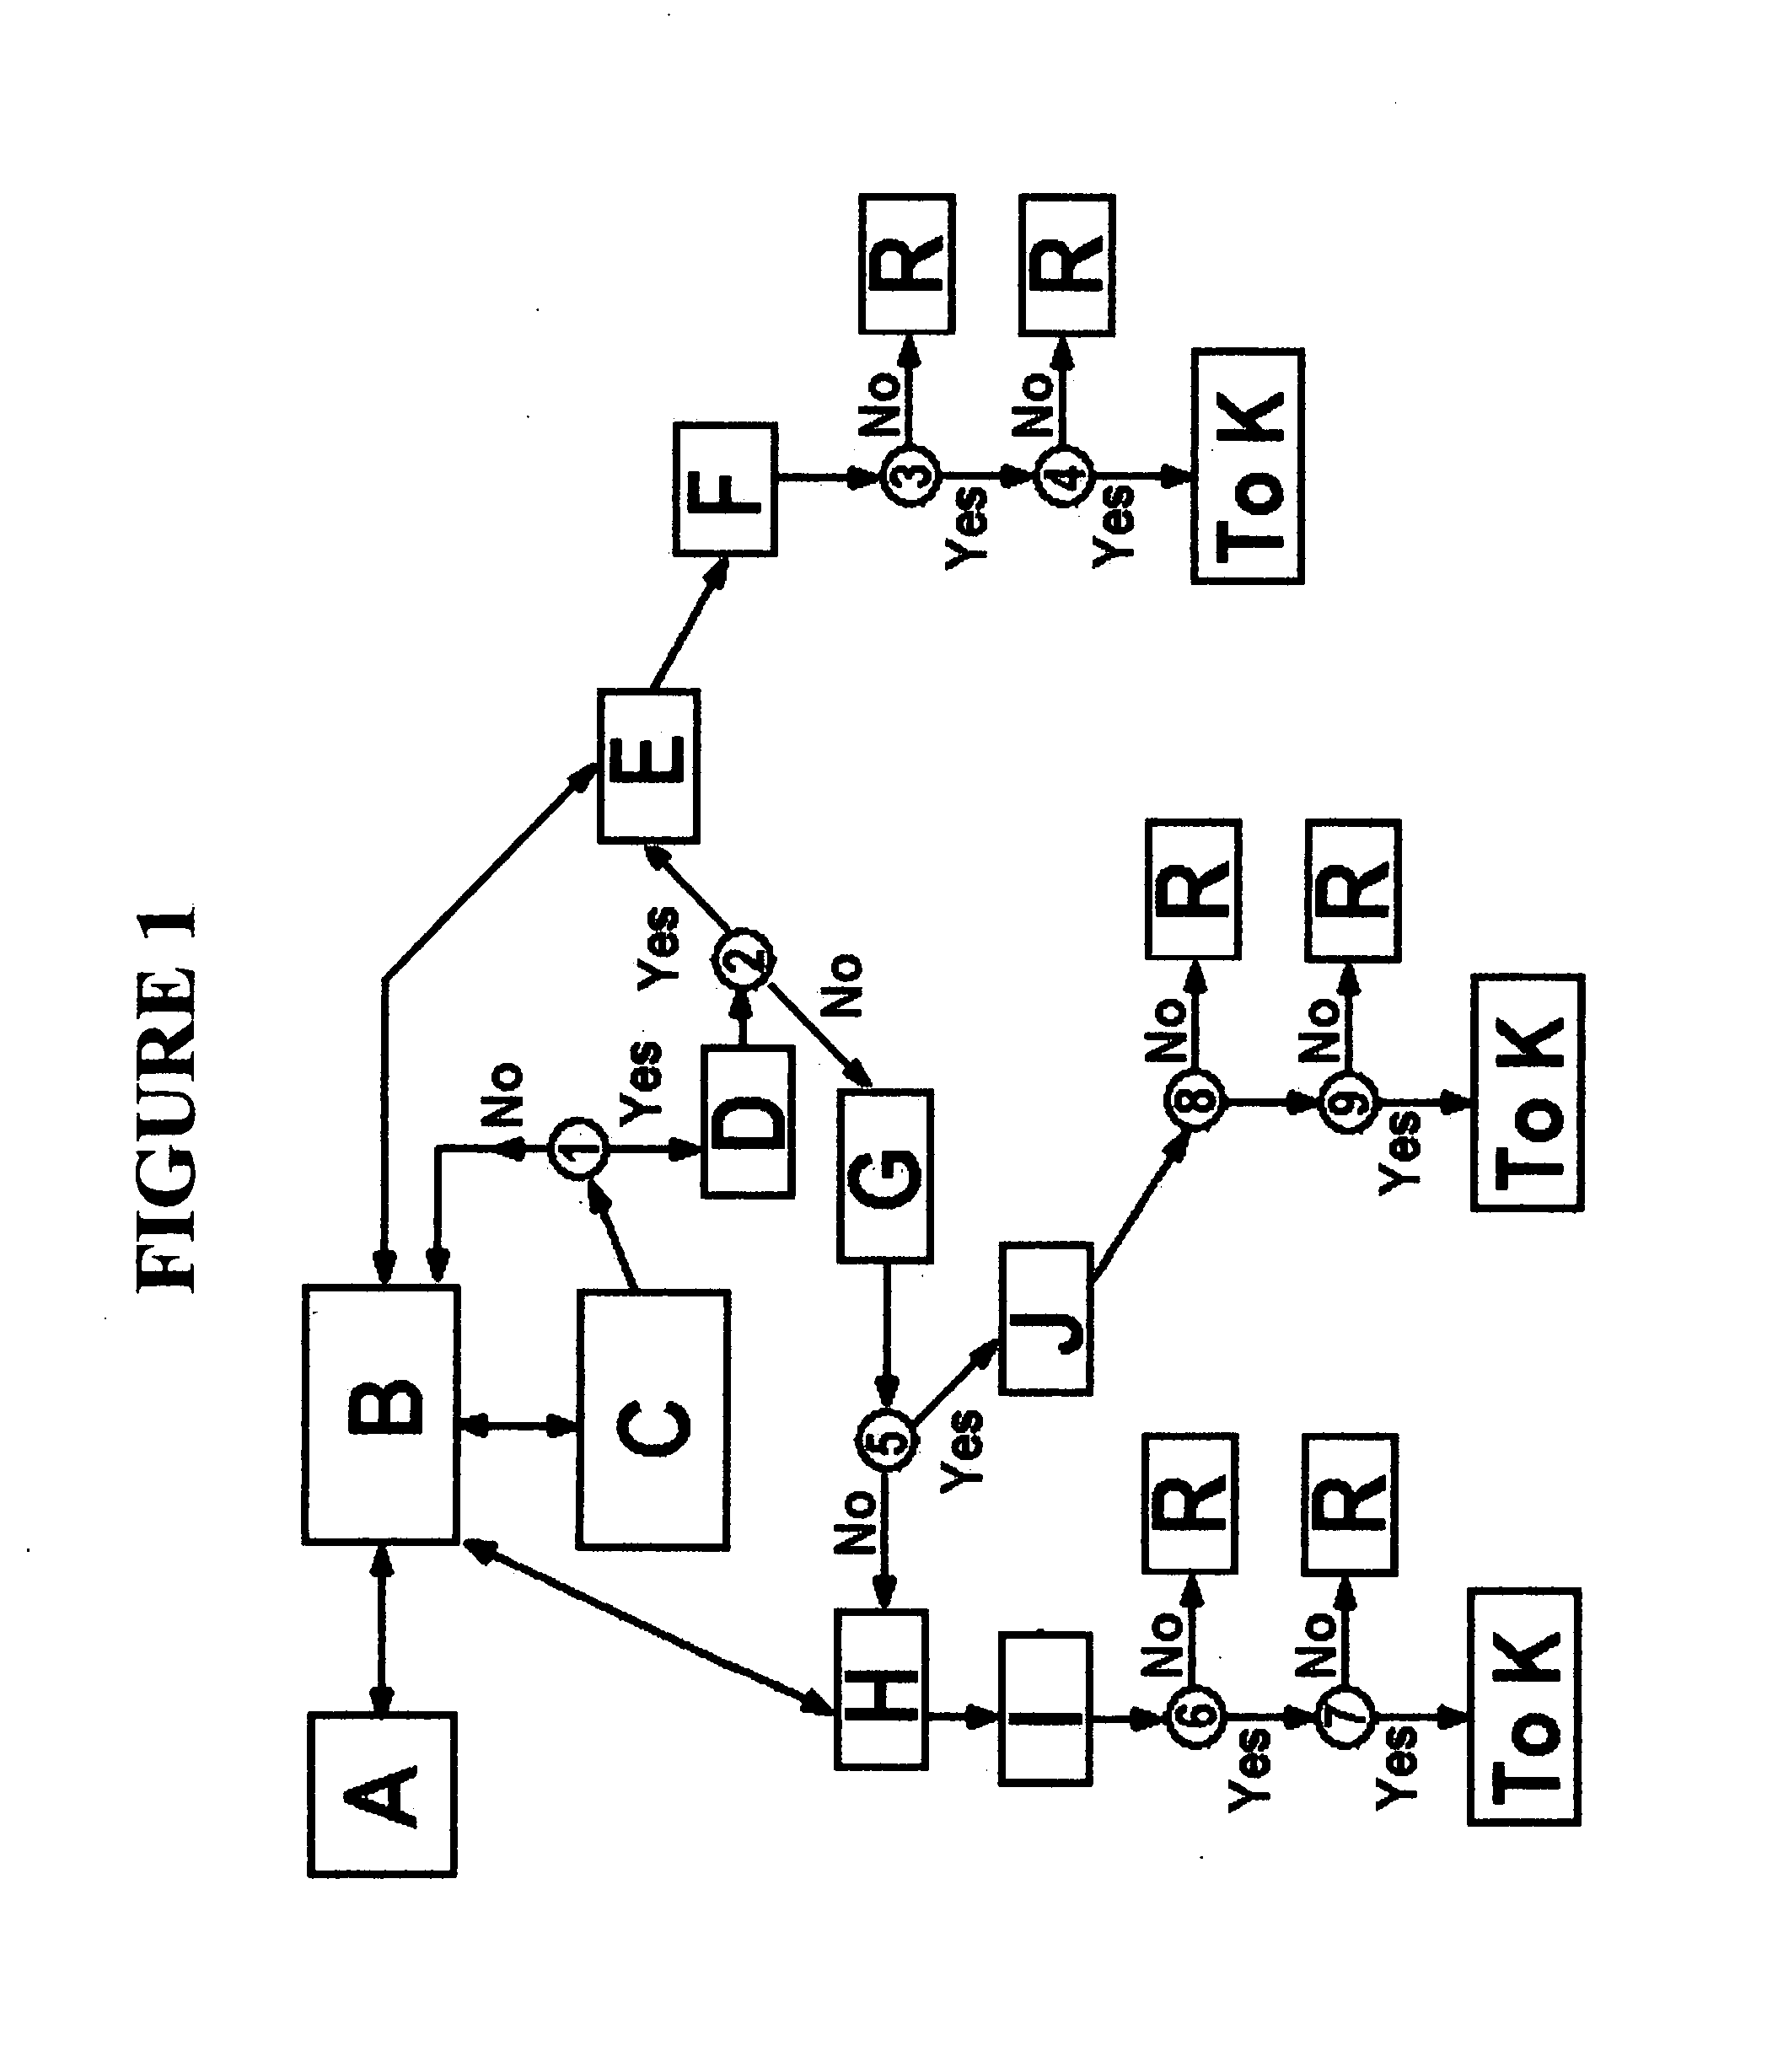 Software, system and method for computer based assessing of health insurance risk profiles for a group seeking health insurance and providing a composite insurance policy